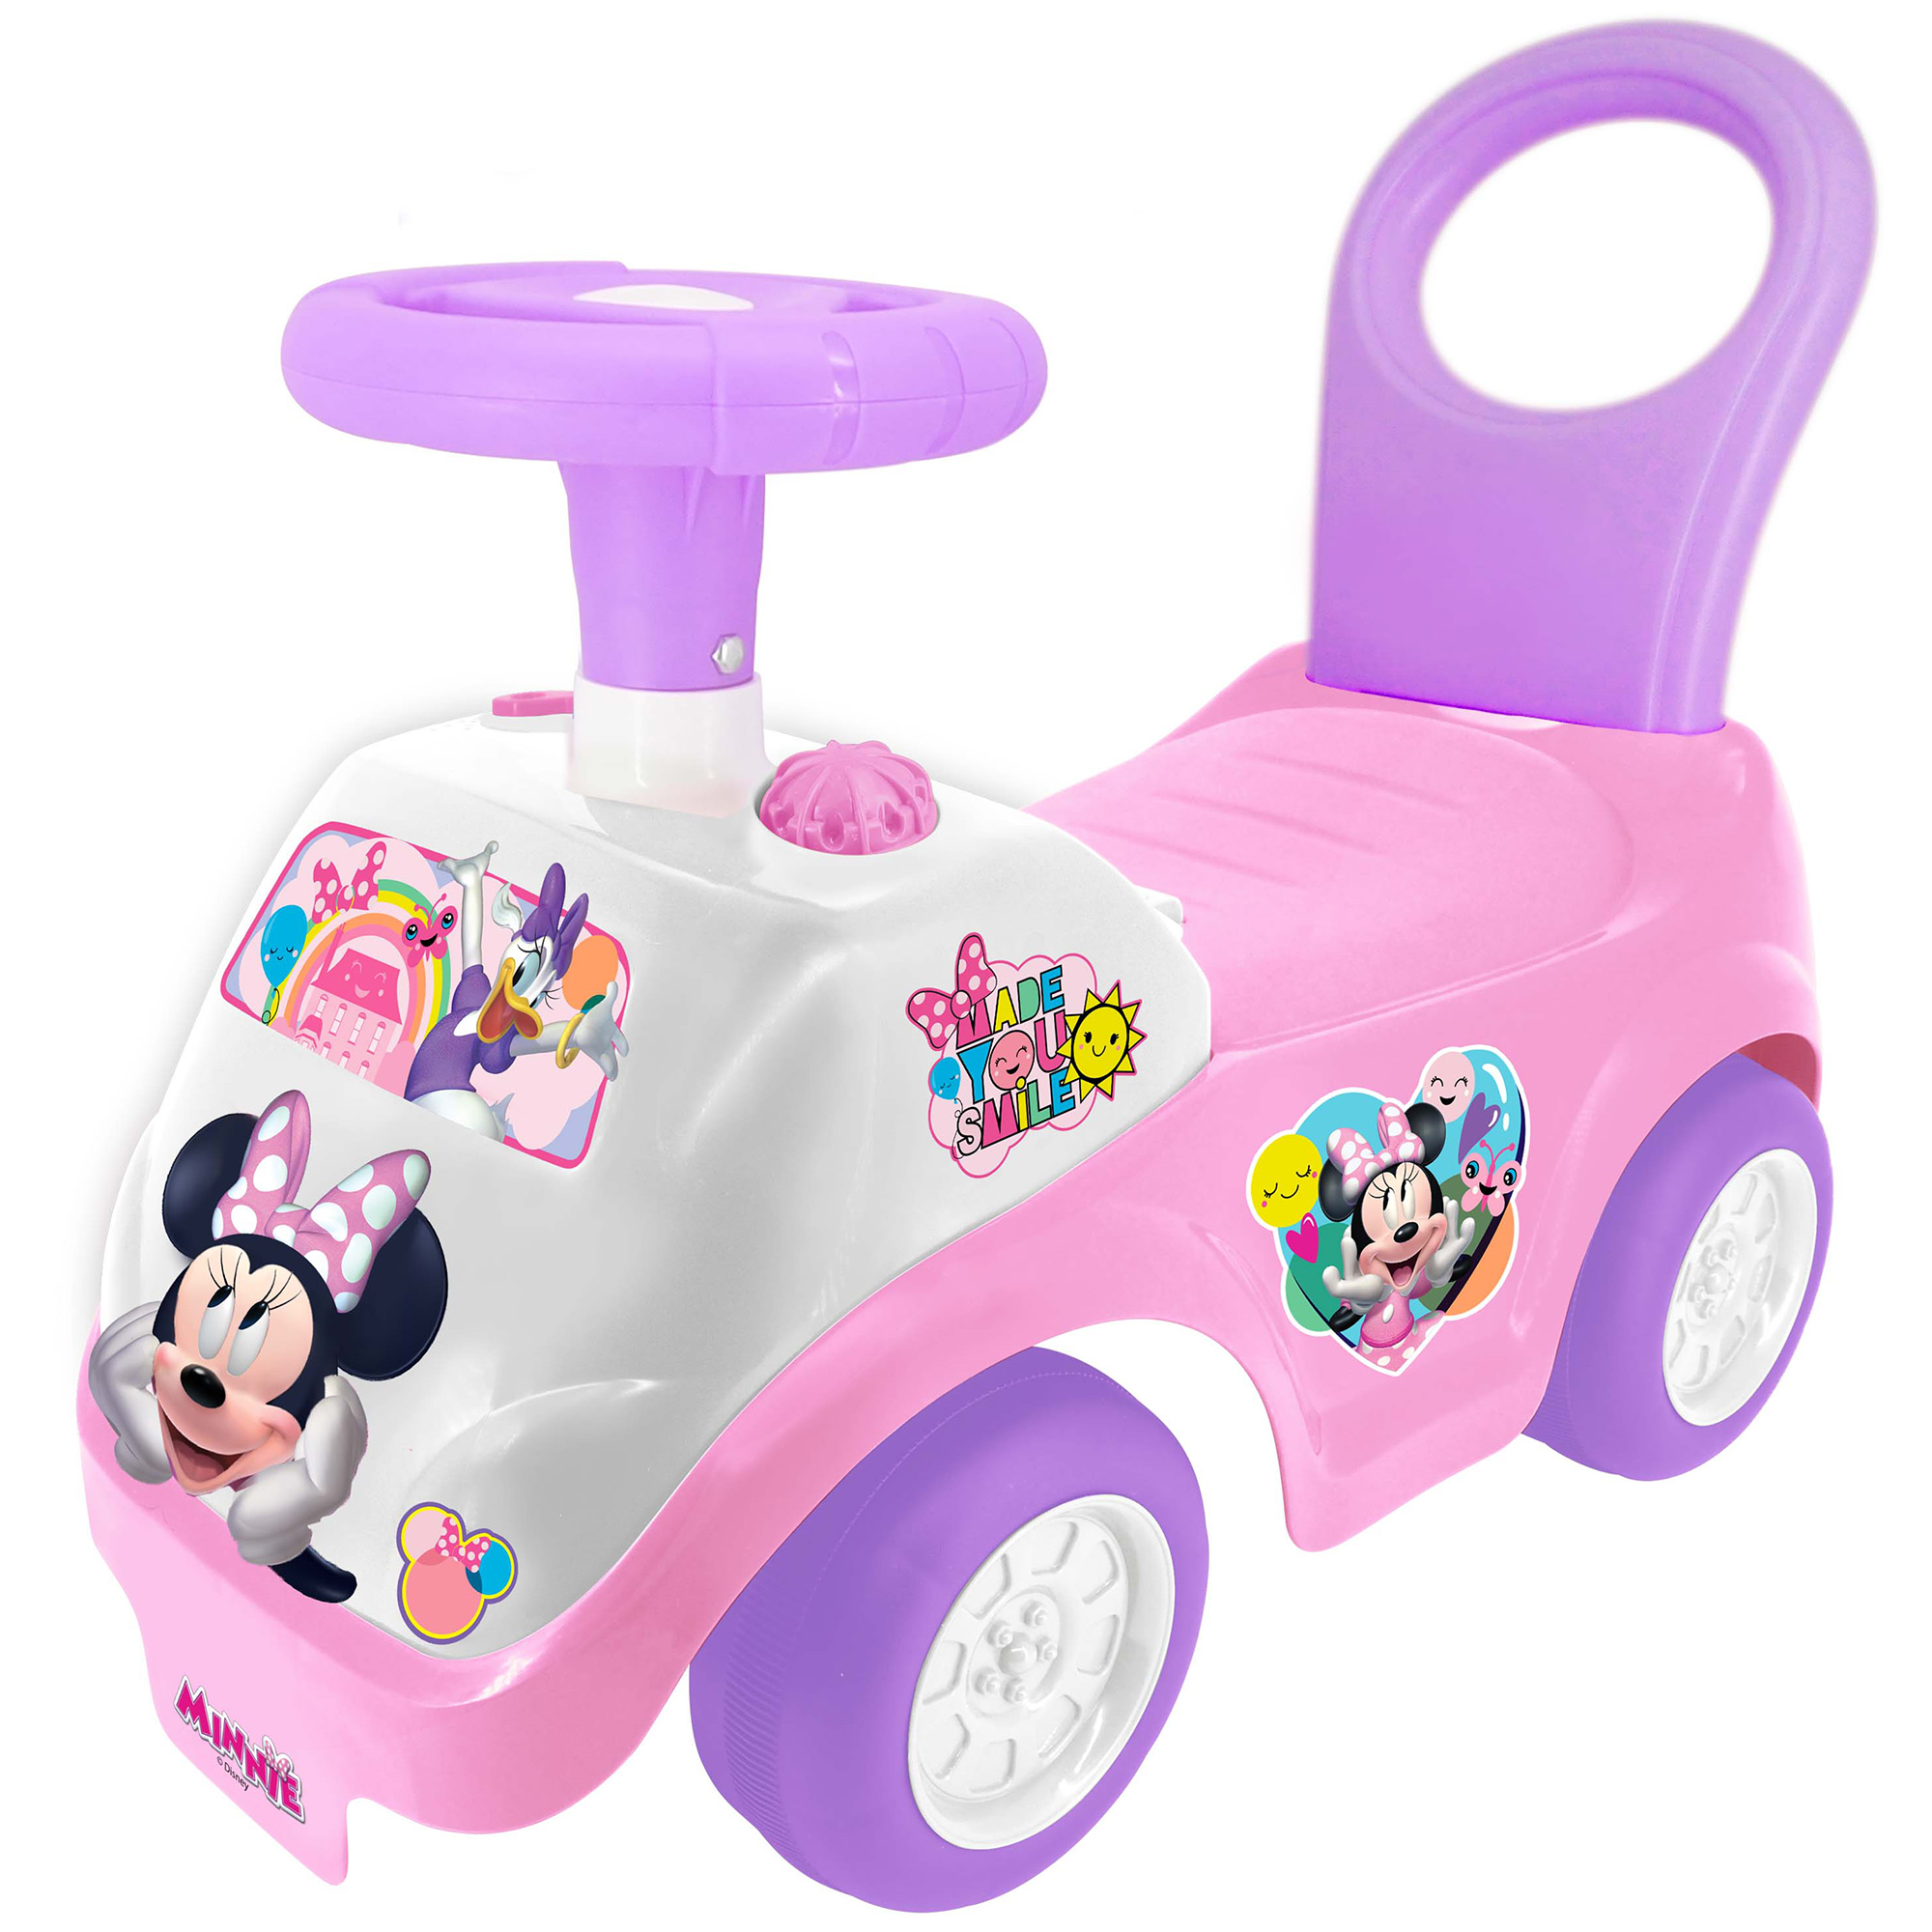 Kiddieland Disney Lights 'N' Sounds Ride-On: Minnie Mouse Kids Interactive Push Toy Car, Foot To Floor, Toddlers, Ages 12-36 Months - image 1 of 5